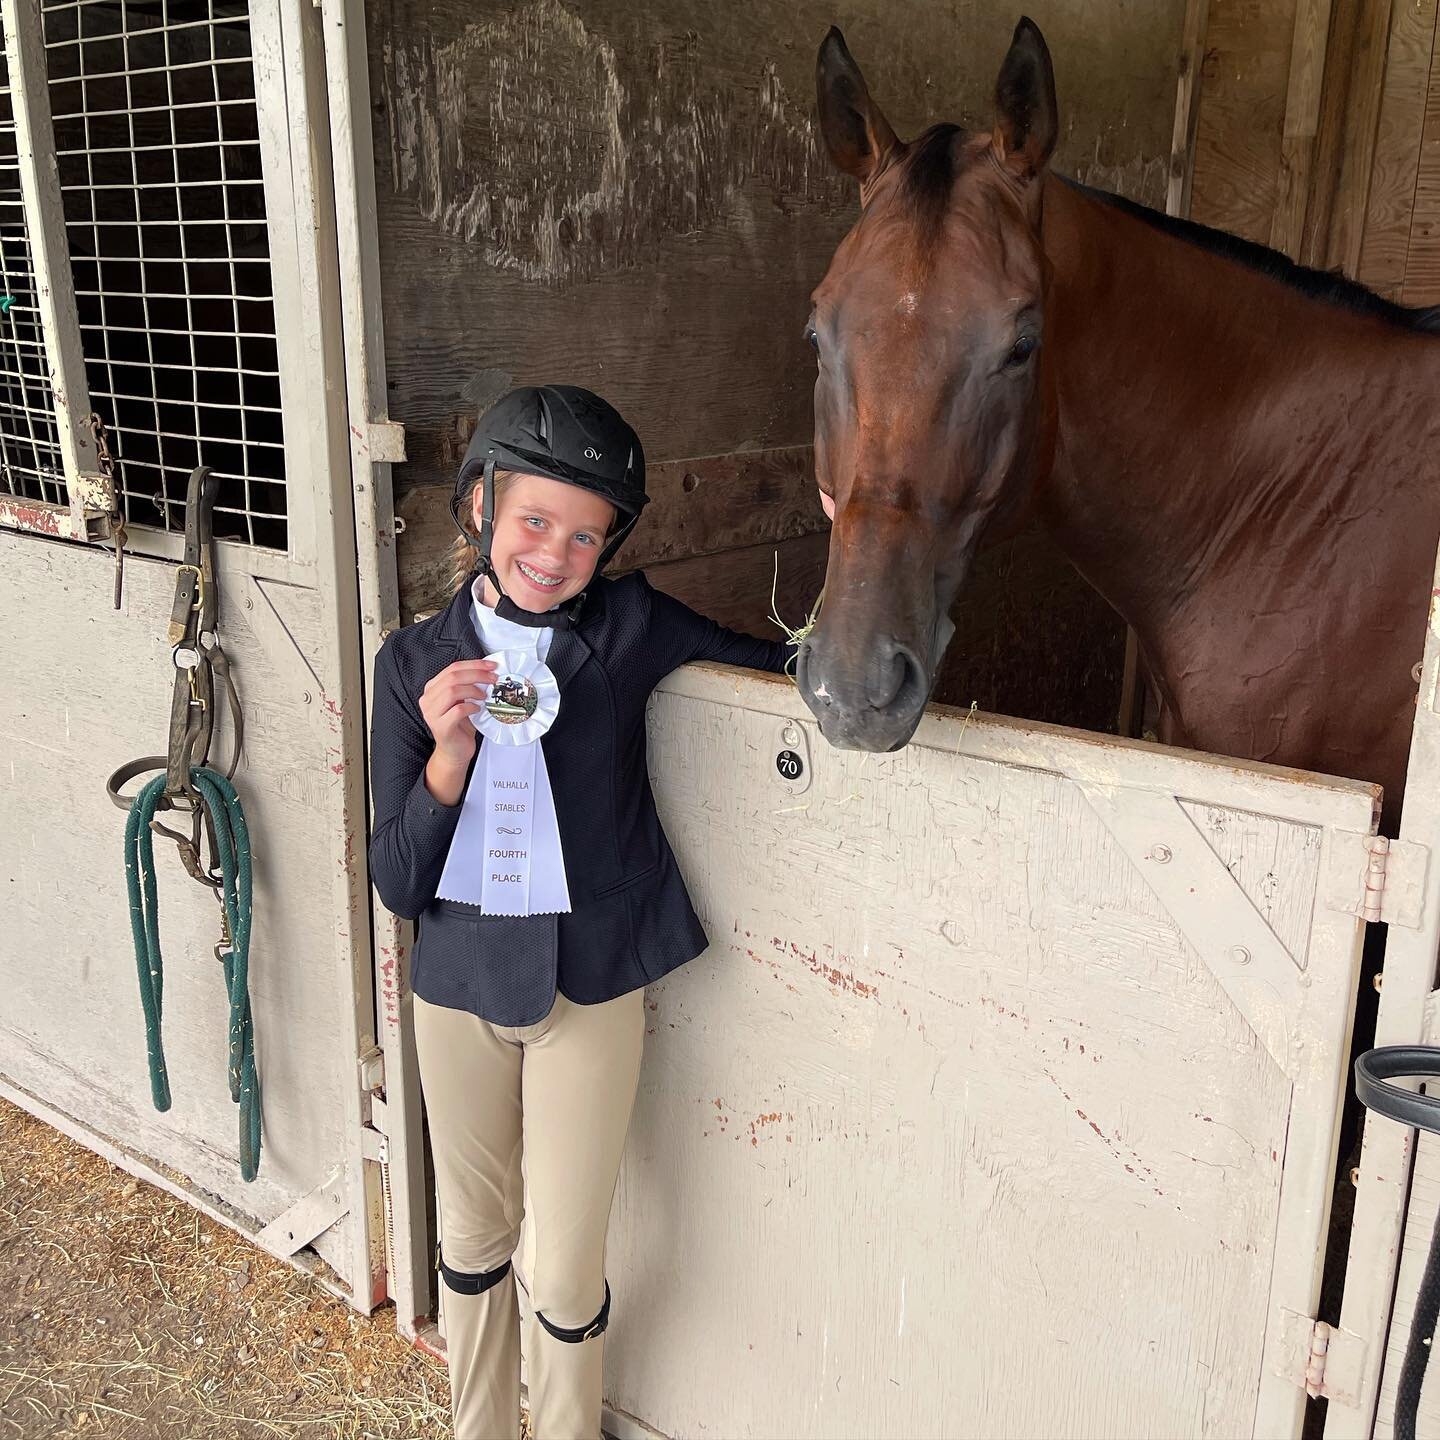 We are so proud of Brooklyn! She and Bob did their first horse show at Vahalla.